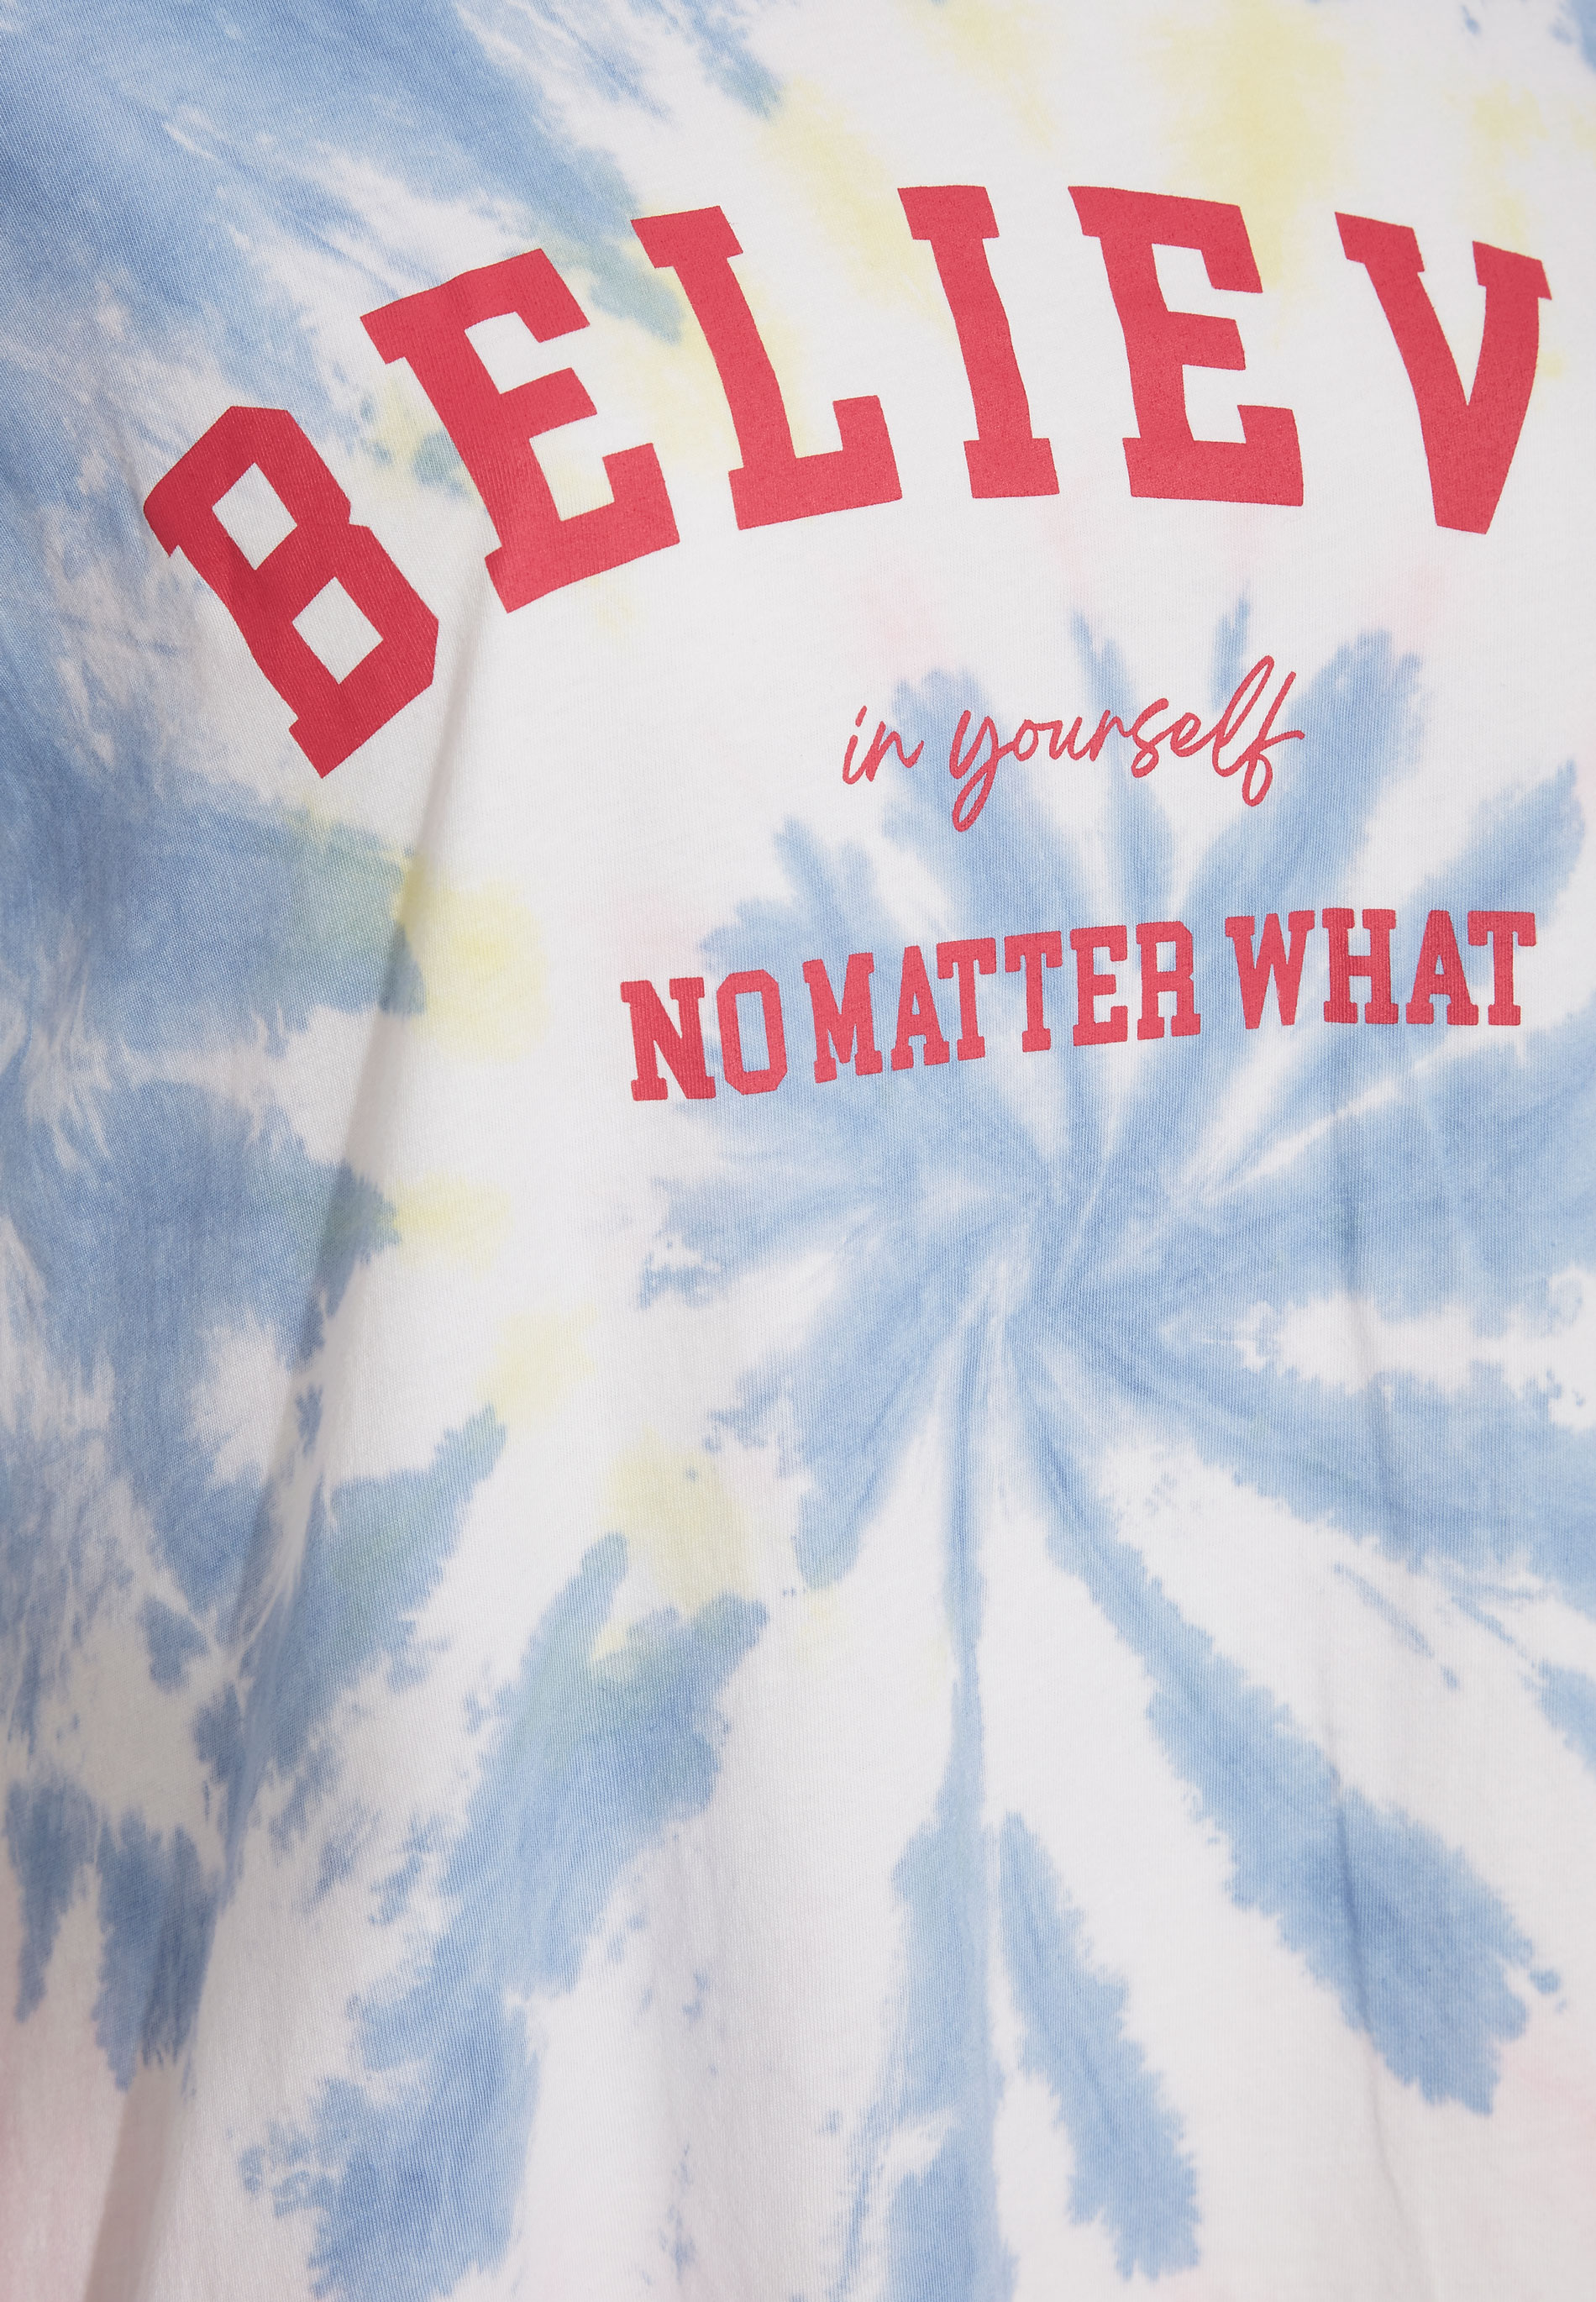 Grande taille  Tops Grande taille  Tops à Slogans | T-Shirt Blanc Tie & Dye 'Believe in Yourself' - ZD98512